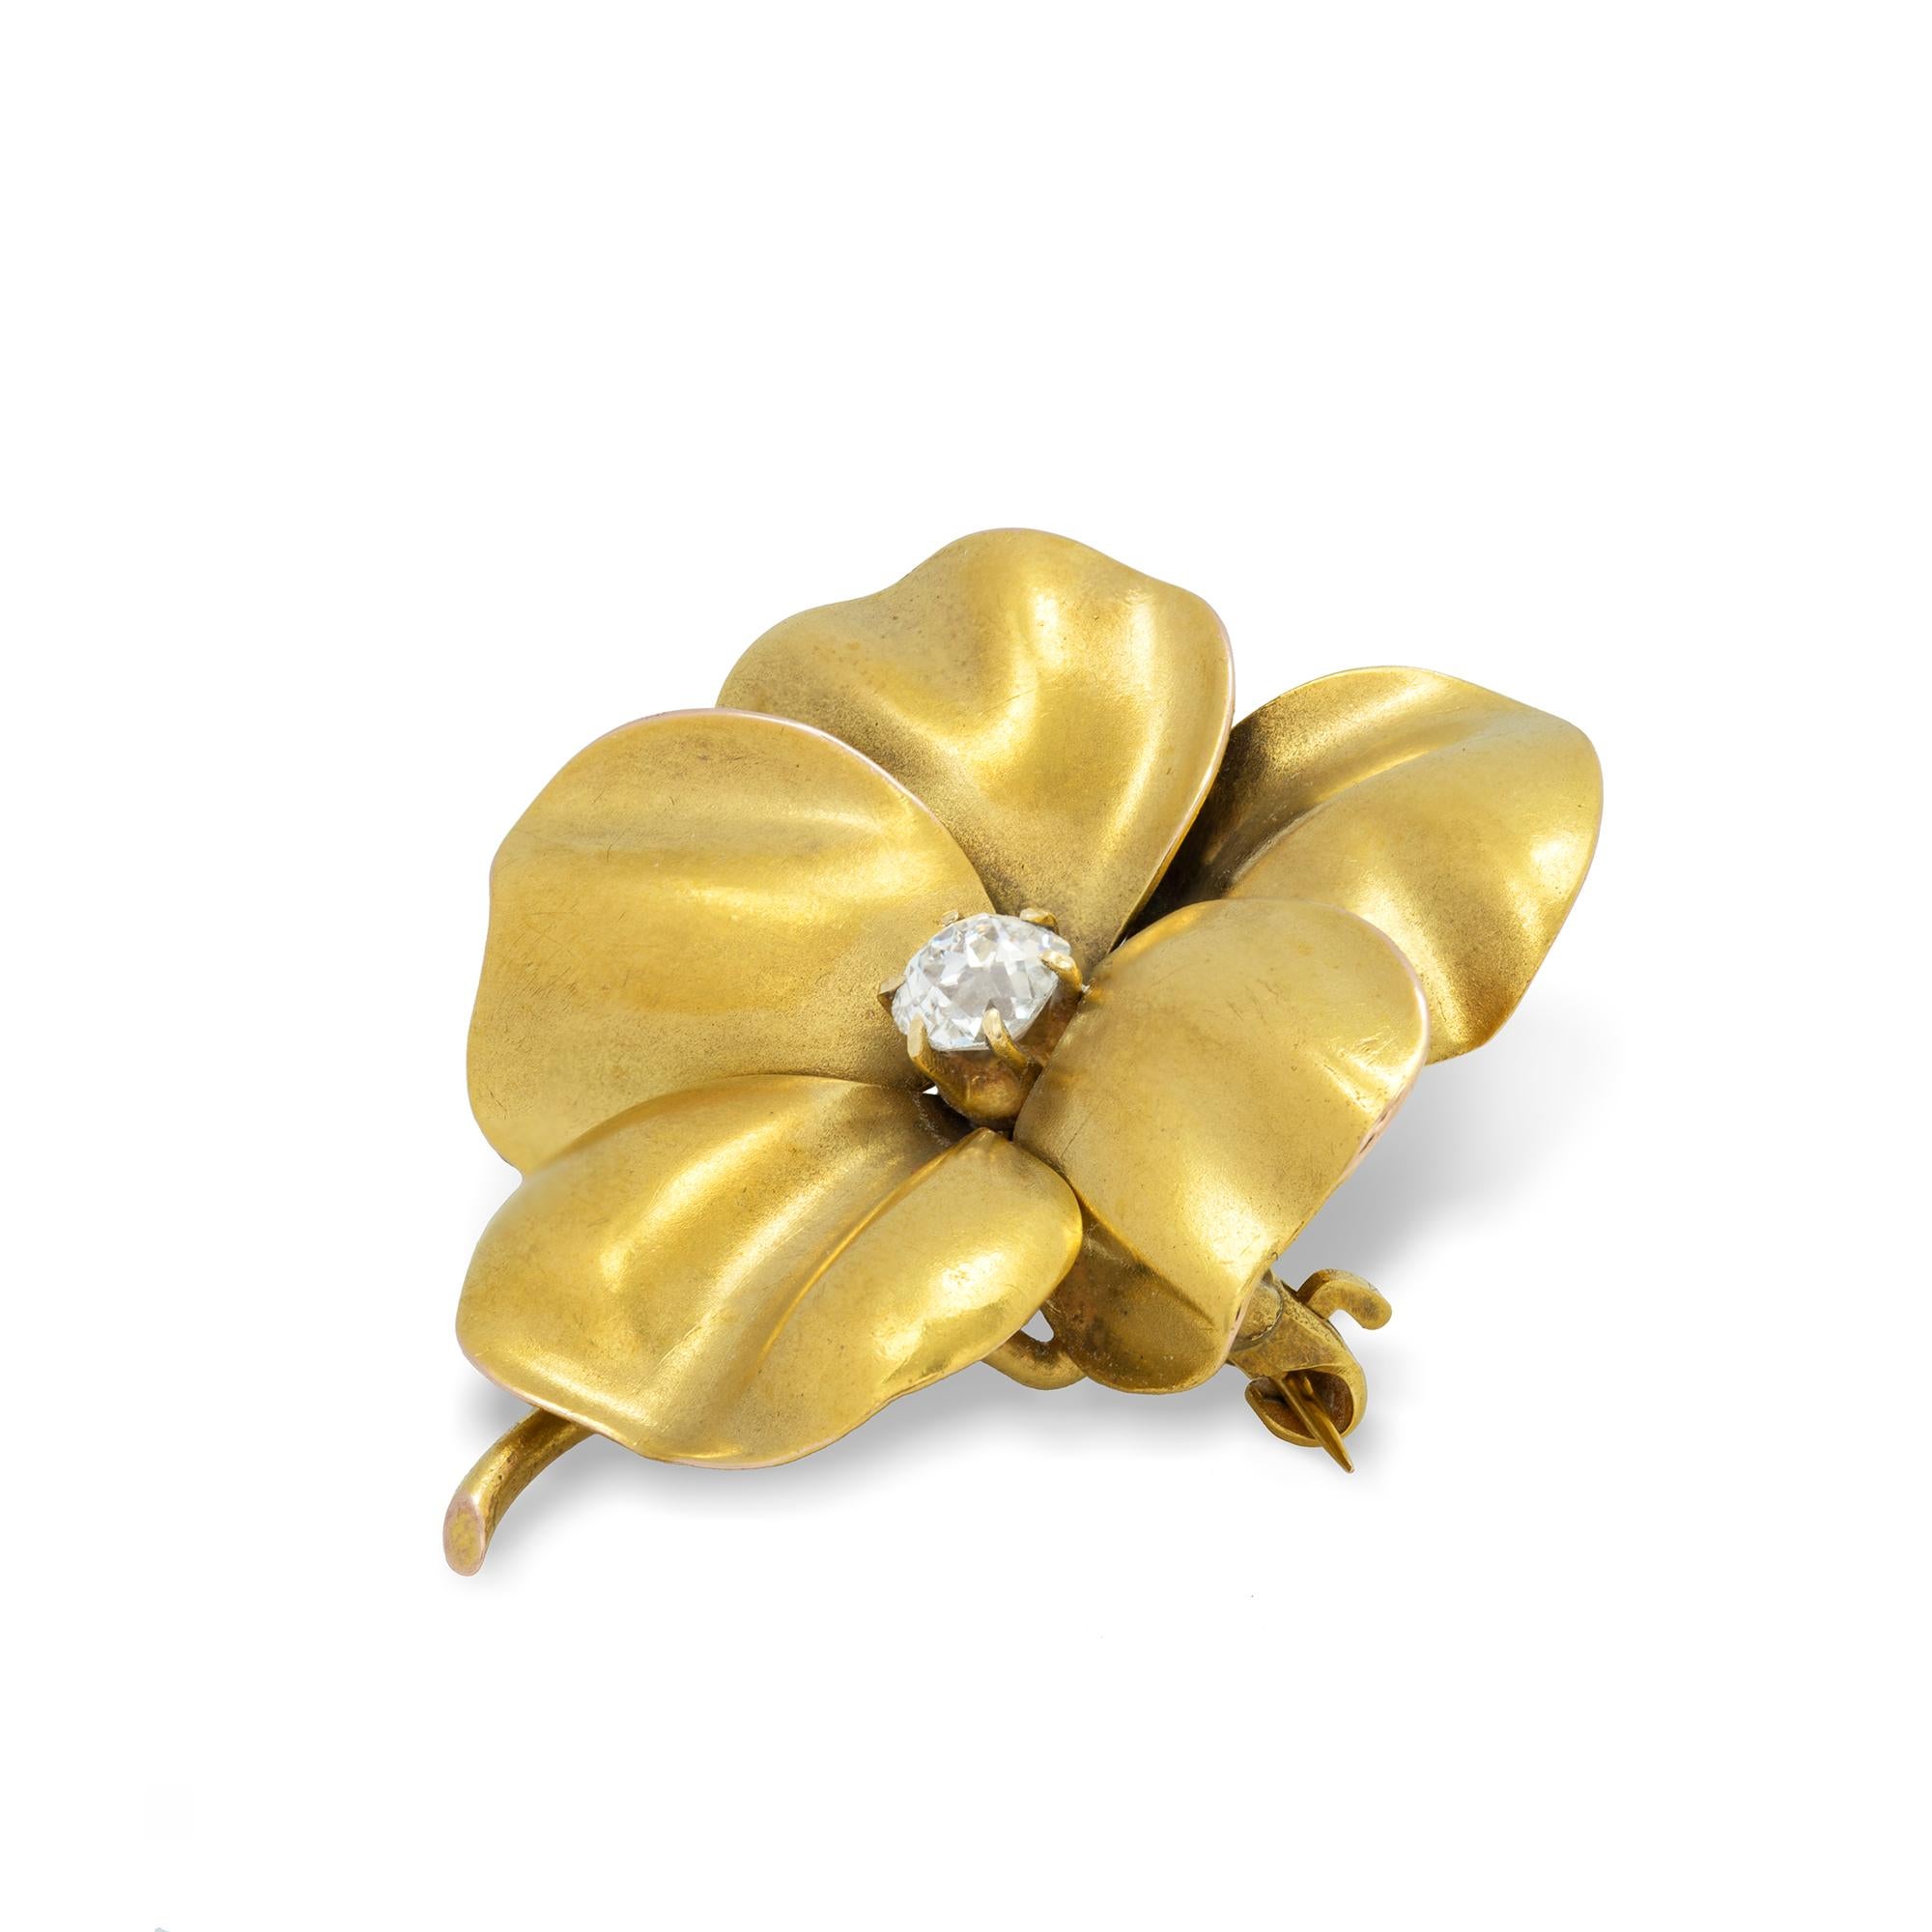 An antique gold pansy brooch, a round old-cut diamond weighing approximately 0.25 carats, to the centre of five realistically carved petals, all made in yellow gold with brooch fittings, stamped 18K, made in the USA, circa 1900, overall dimension